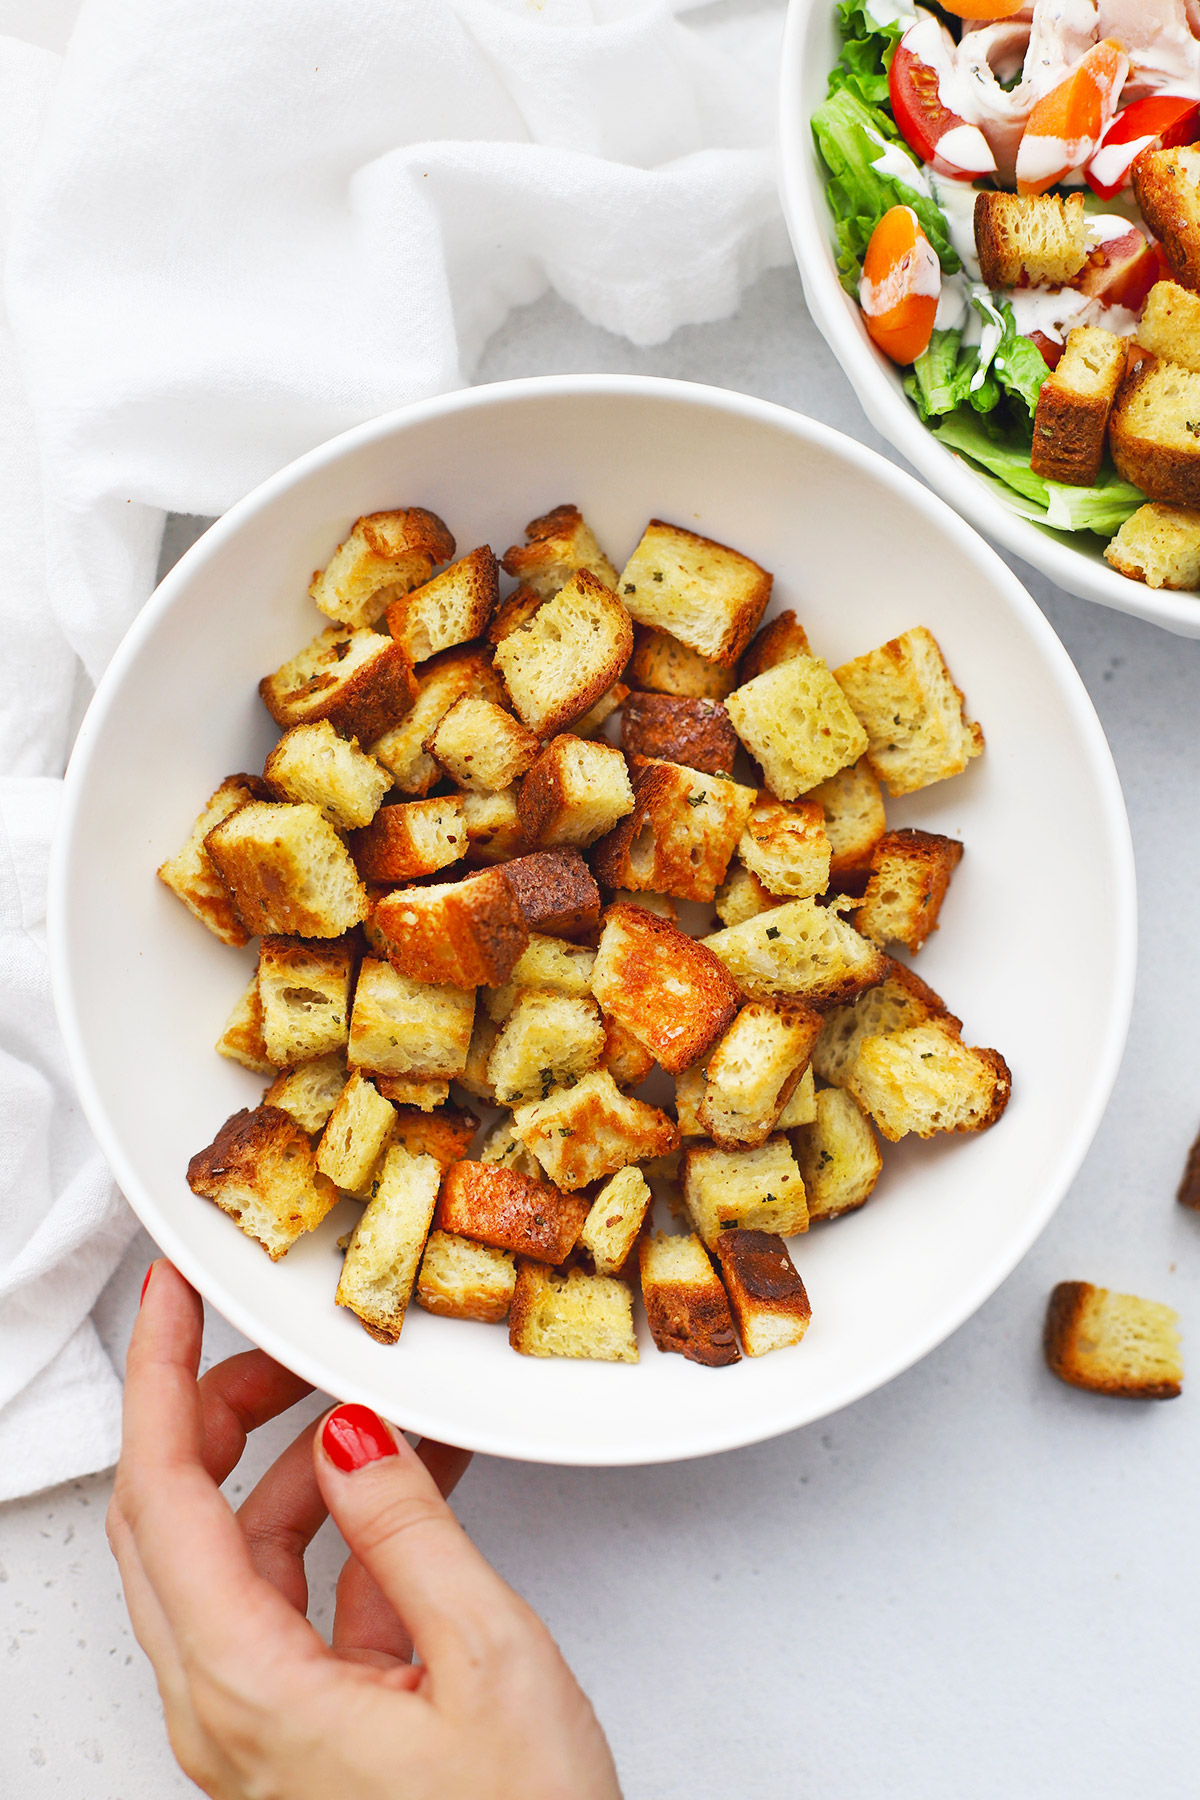 Setting down a bowl of gluten-free croutons next to a bowl of salad